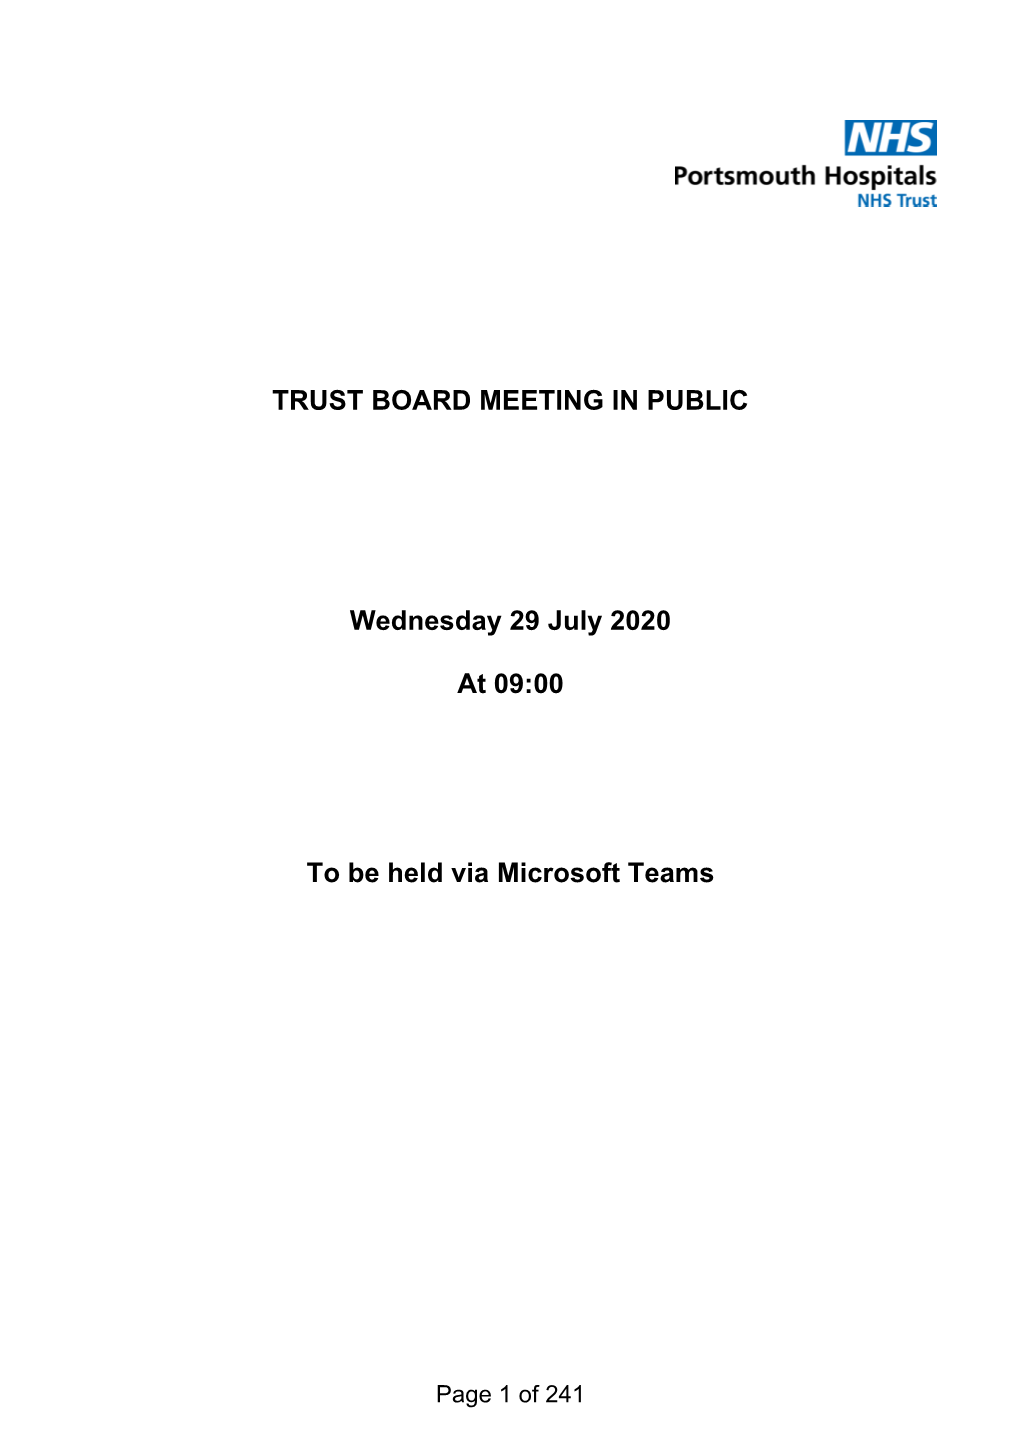 TRUST BOARD MEETING in PUBLIC Wednesday 29 July 2020 at 09:00